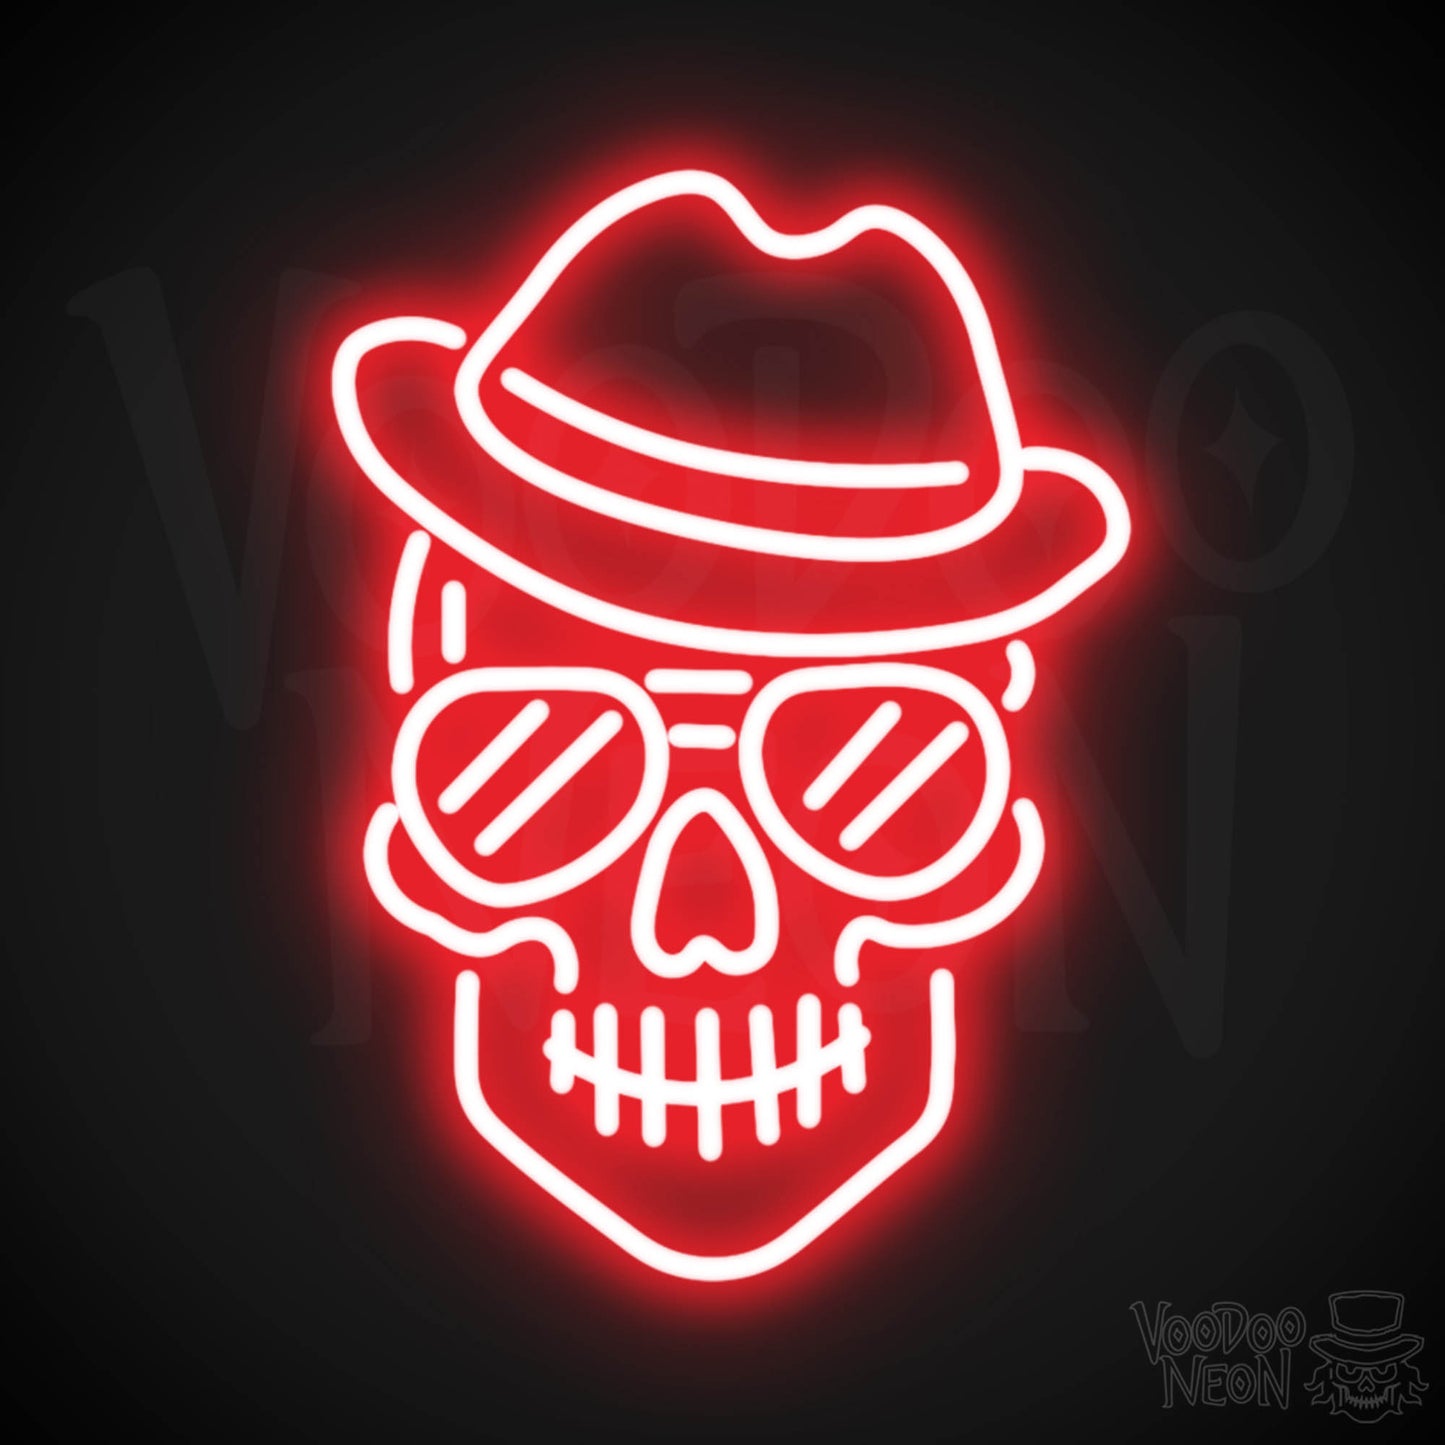 Skull Face Neon Sign - Neon Skull Face Sign - Neon Skull Light - Wall Art - Color Red